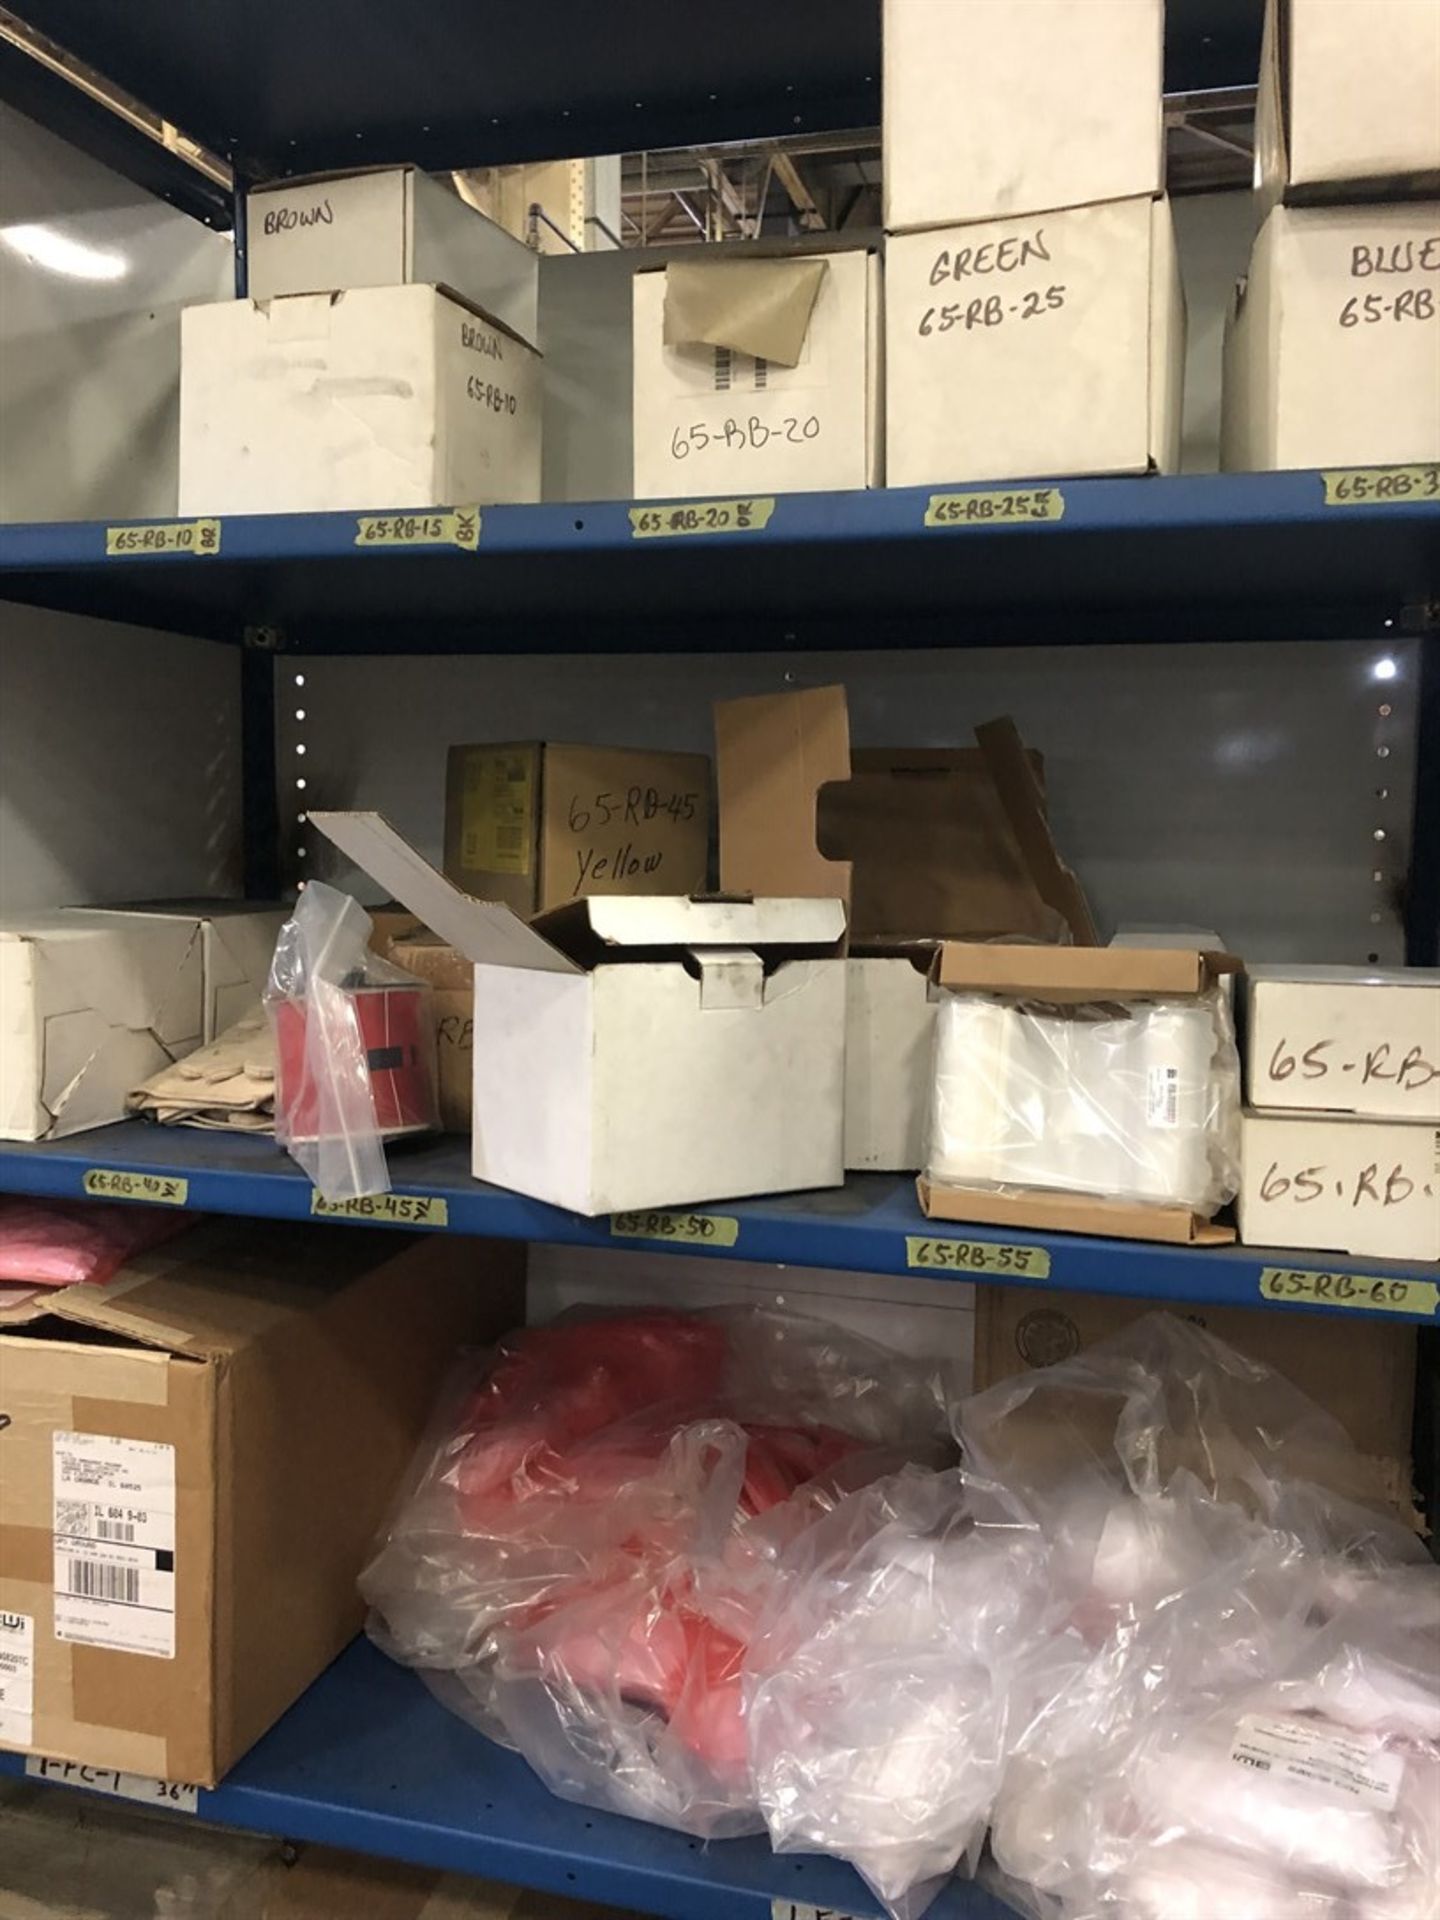 3 Sections of Equipto Shelving, w/ Contents, Including Filters and Tape, (23H) - Image 2 of 3